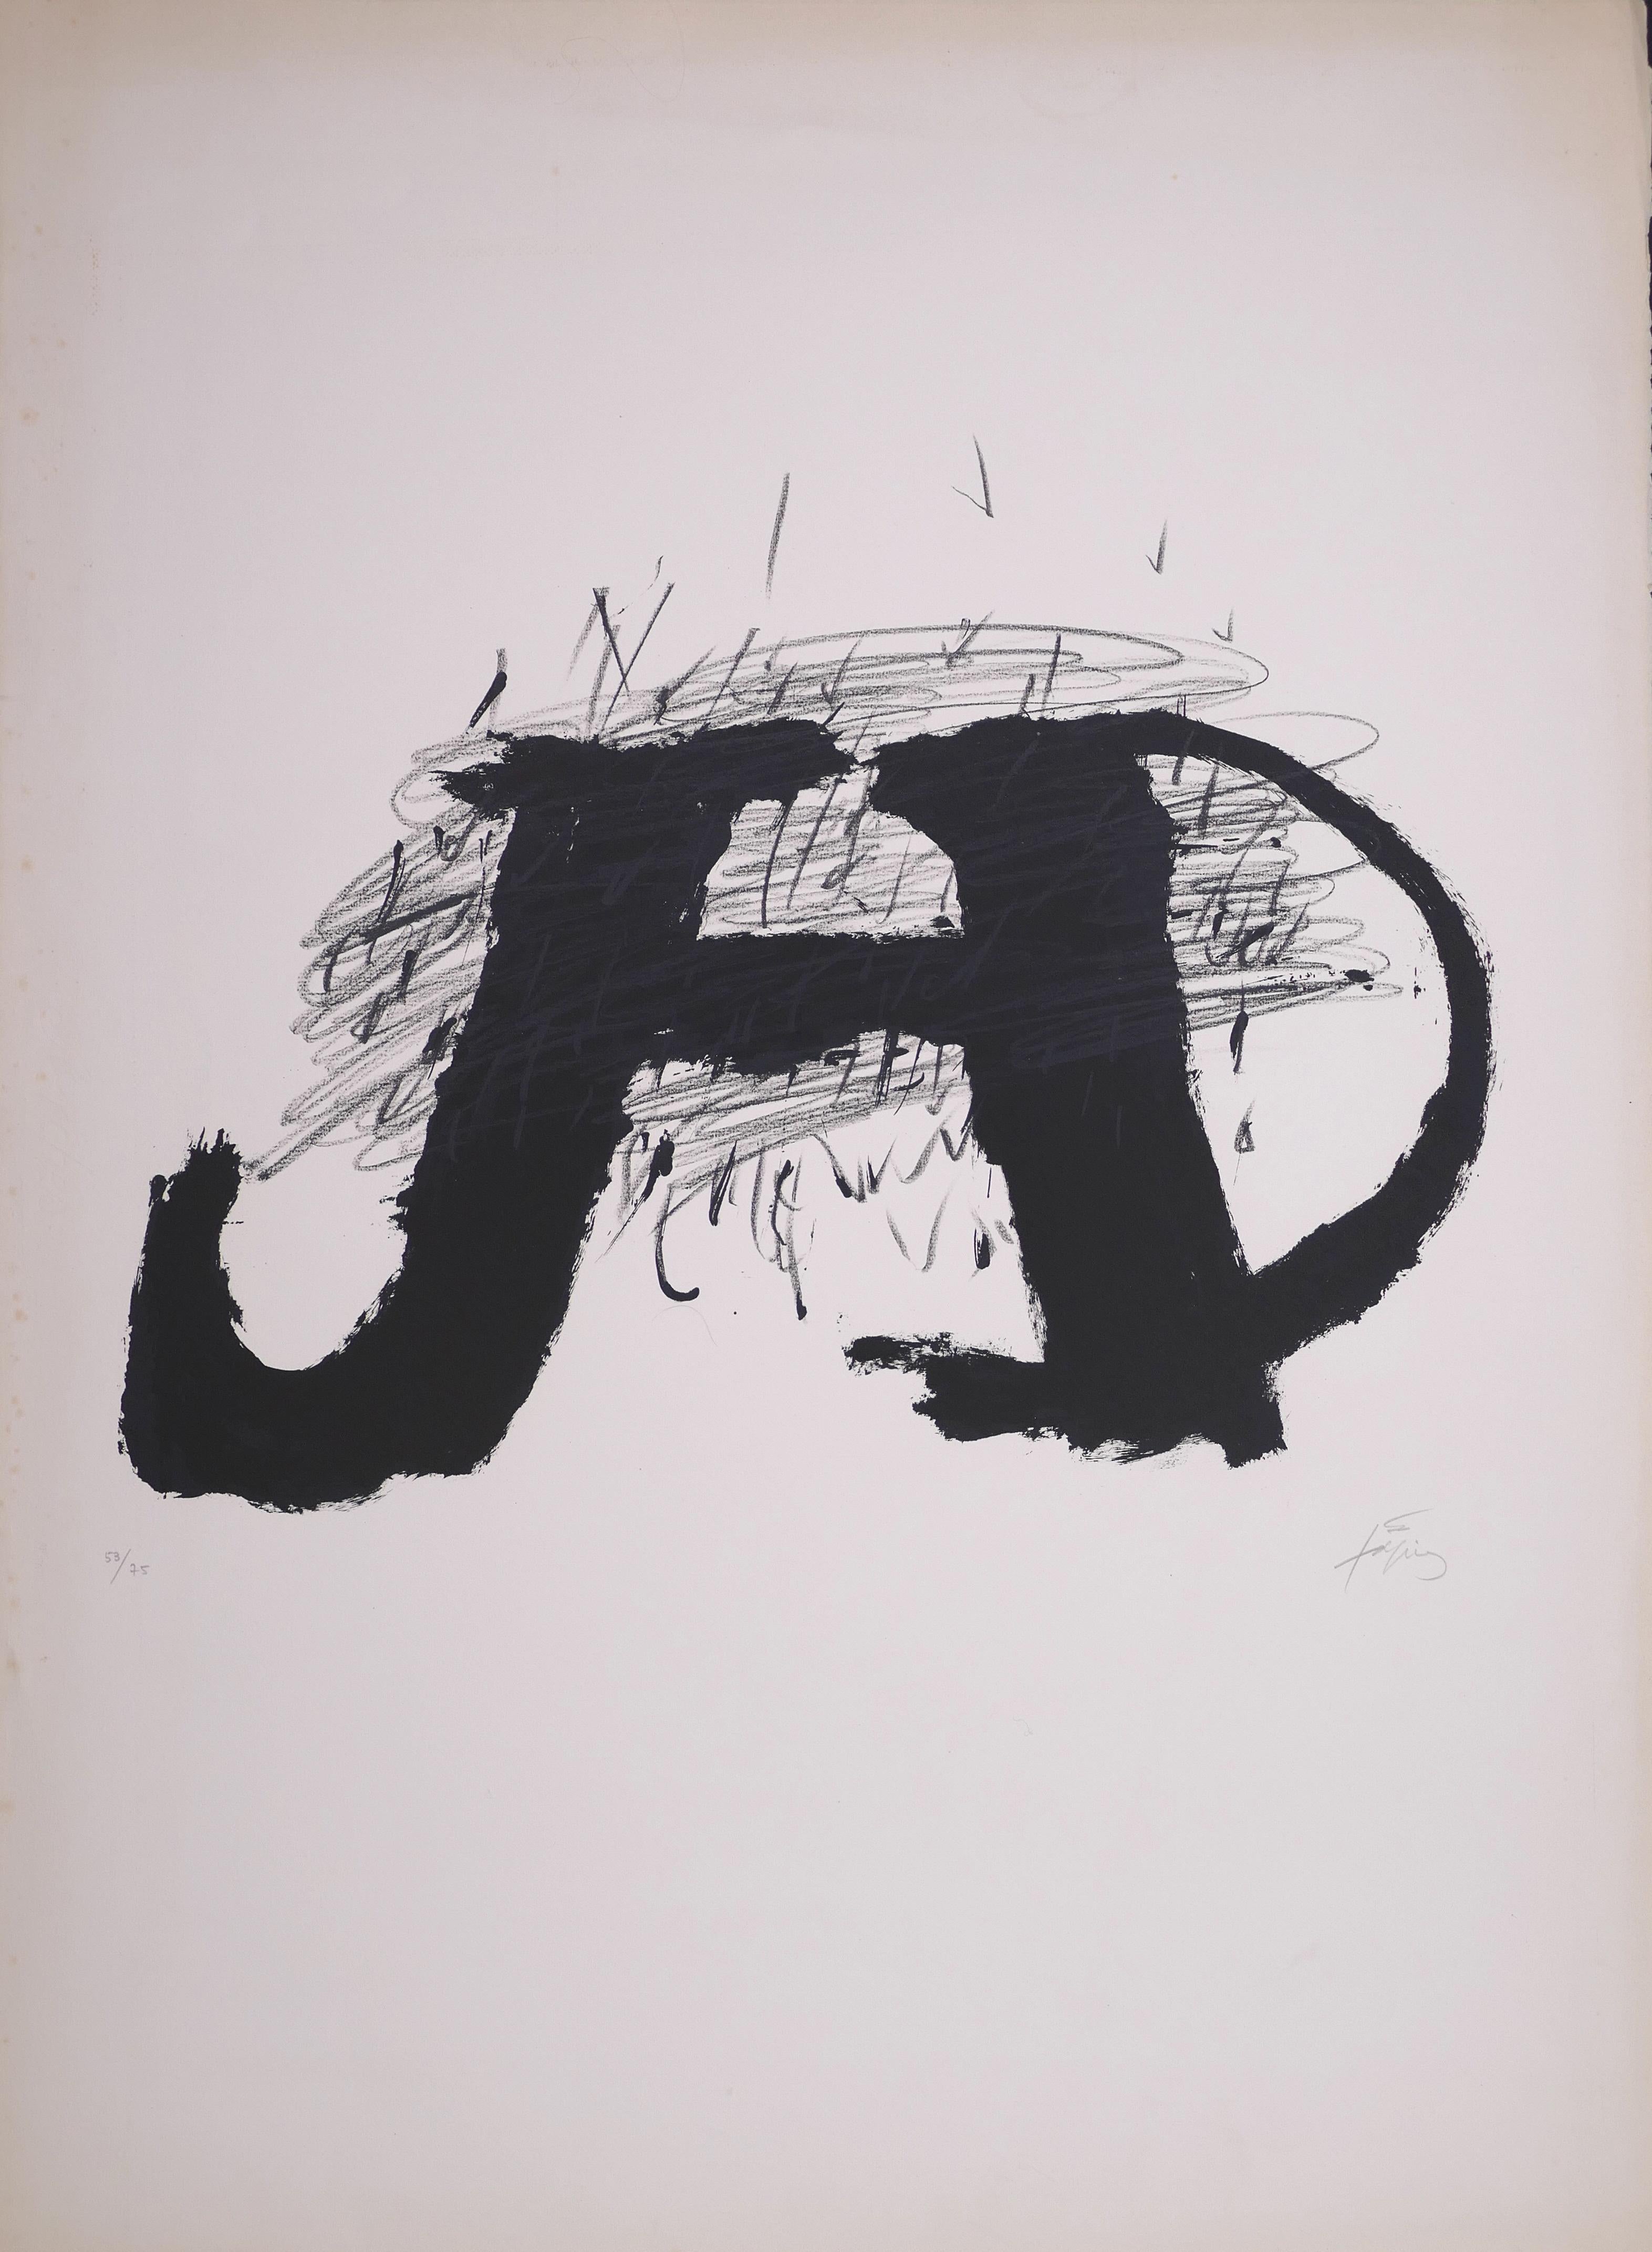 Antoni Tàpies Abstract Print - Untitled - Original Lithograph by Antoni Tapies - 1979